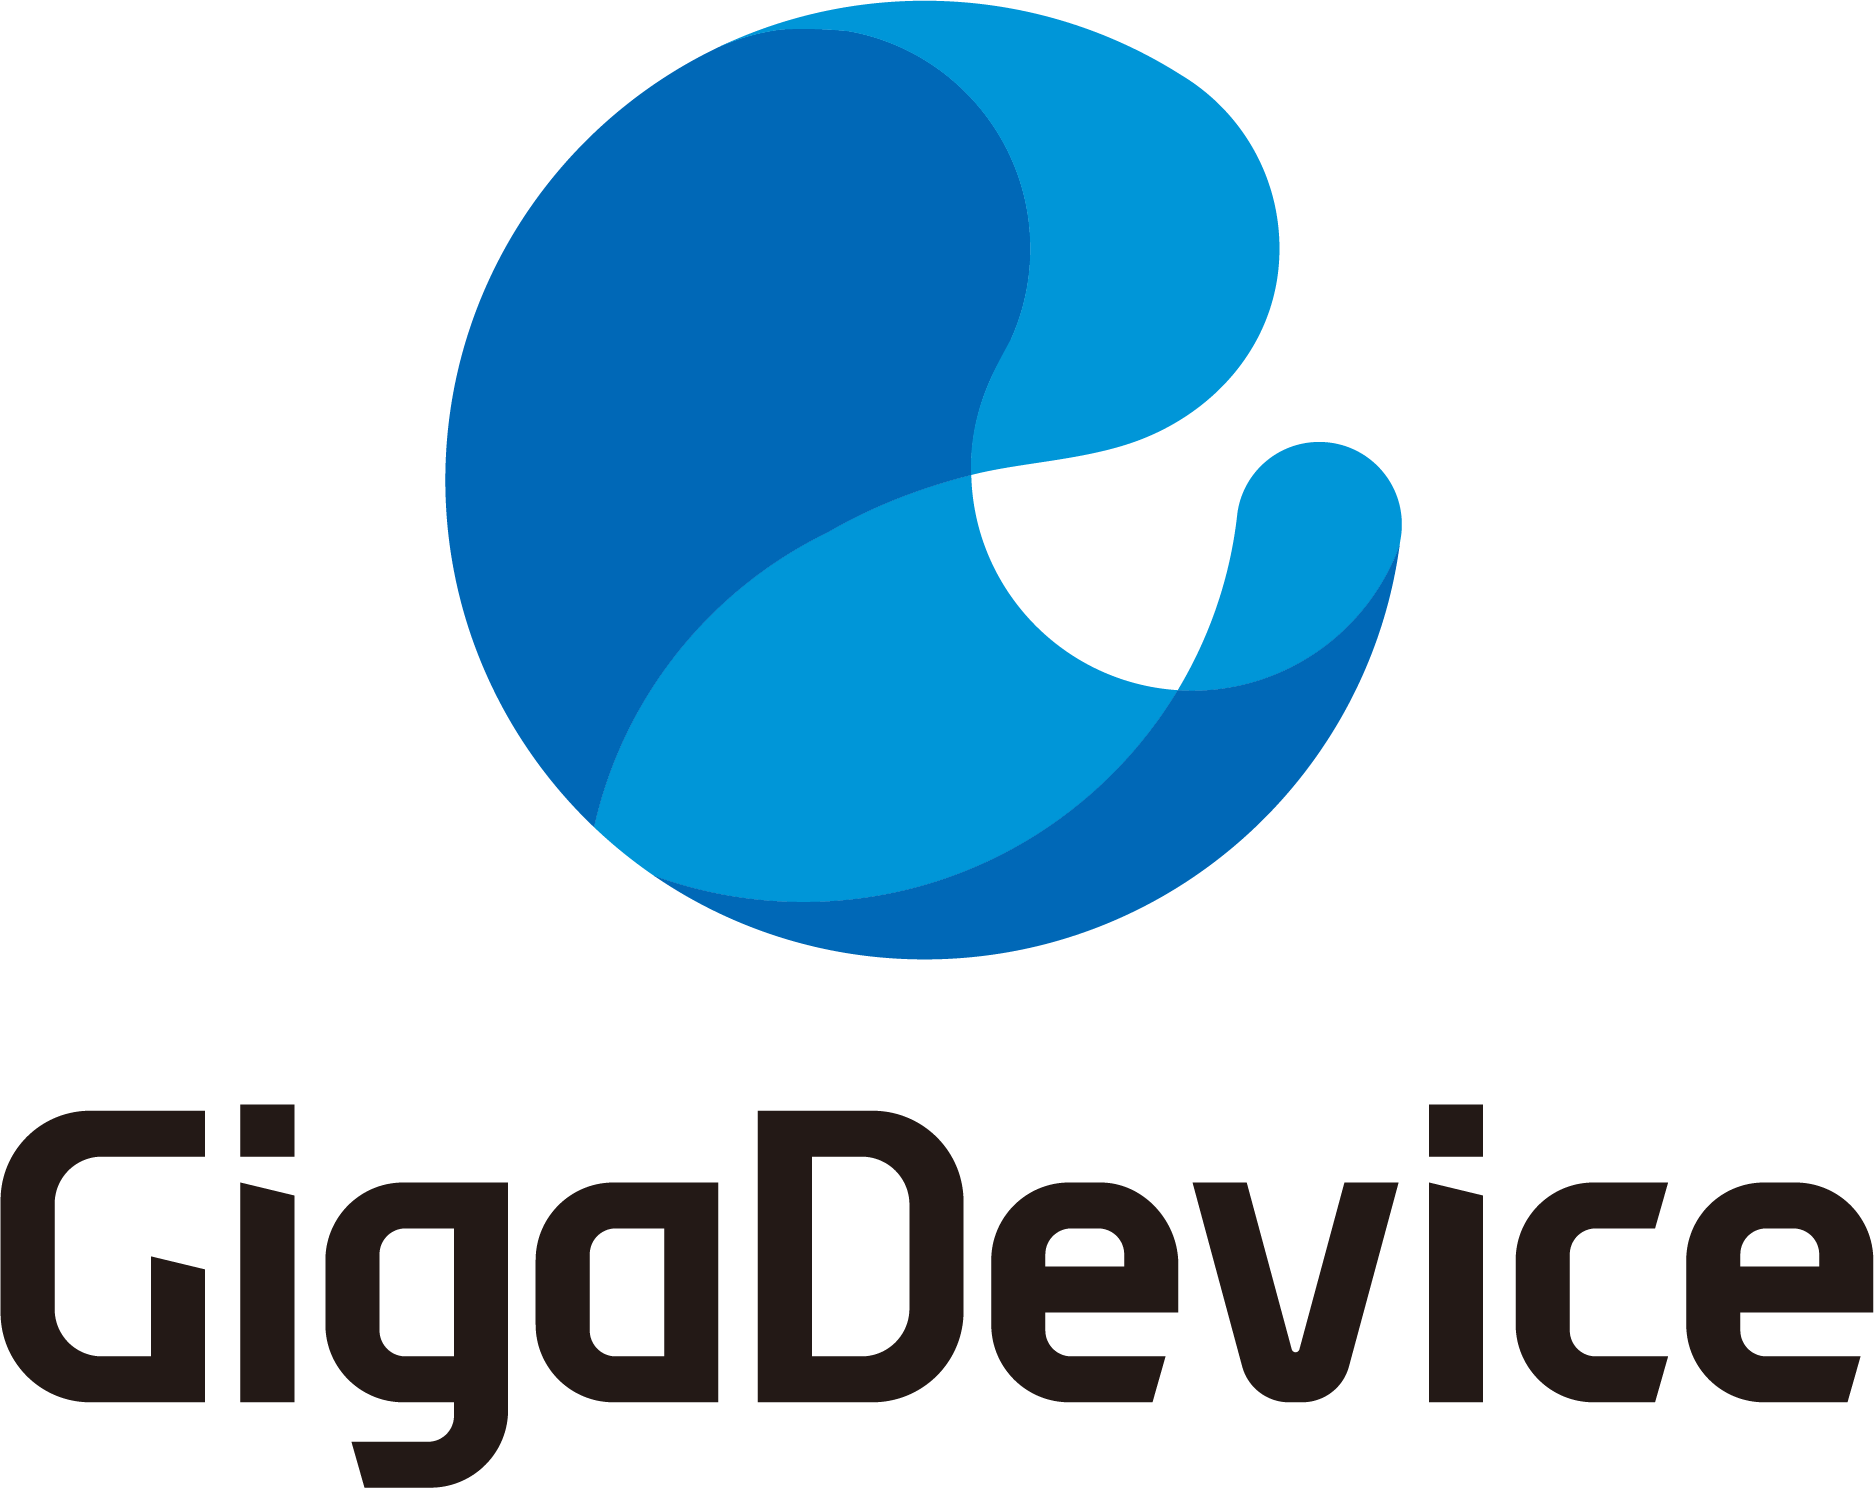 GigaDevice Semiconductor (HK) Limited